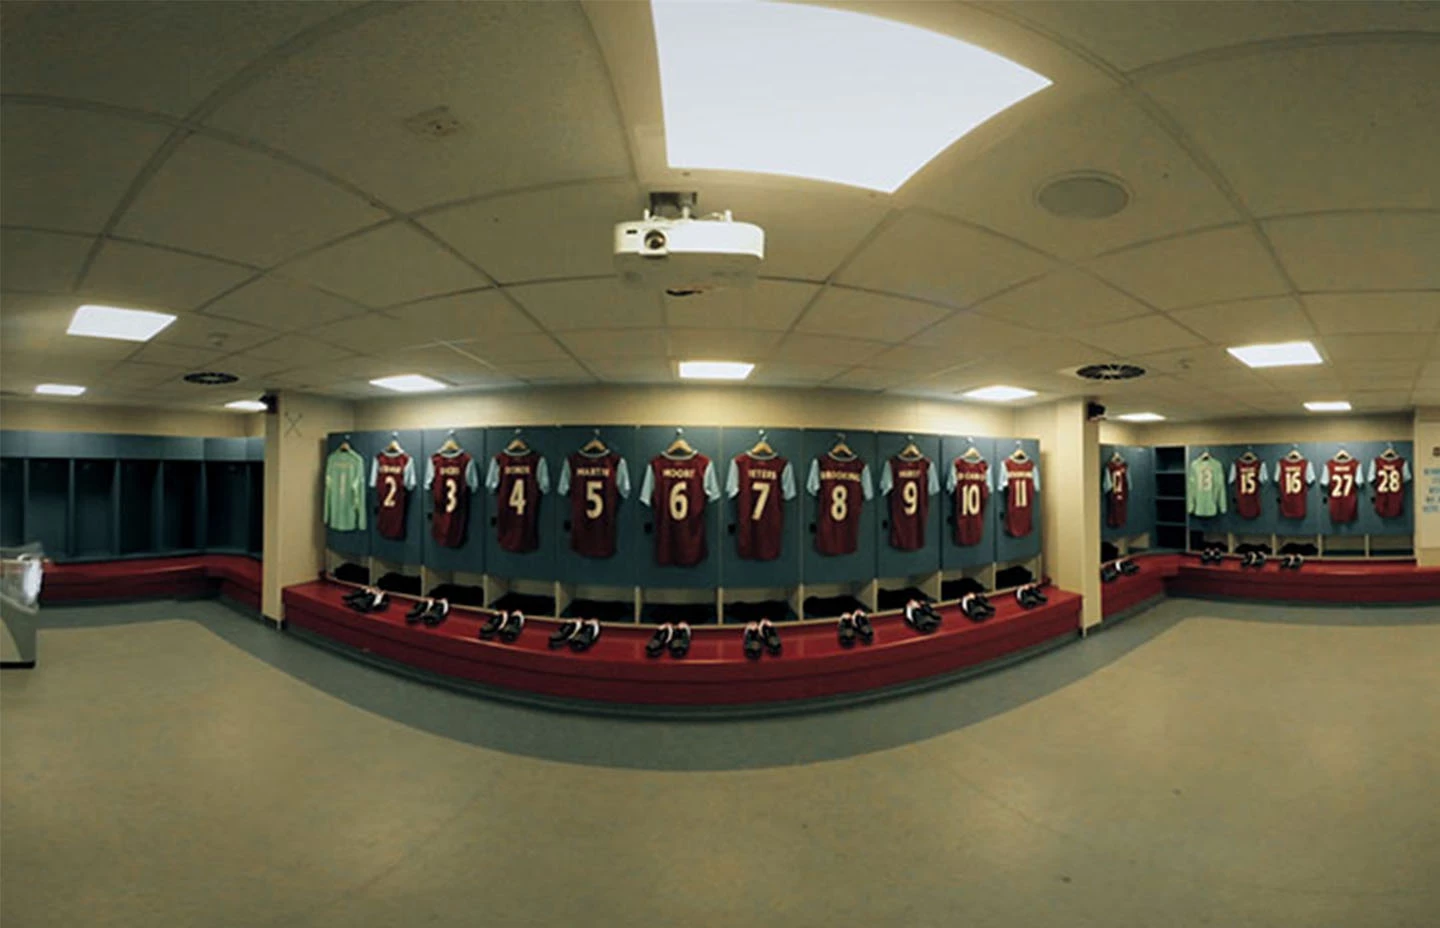 West Ham United changing room with football kits hung on the walls